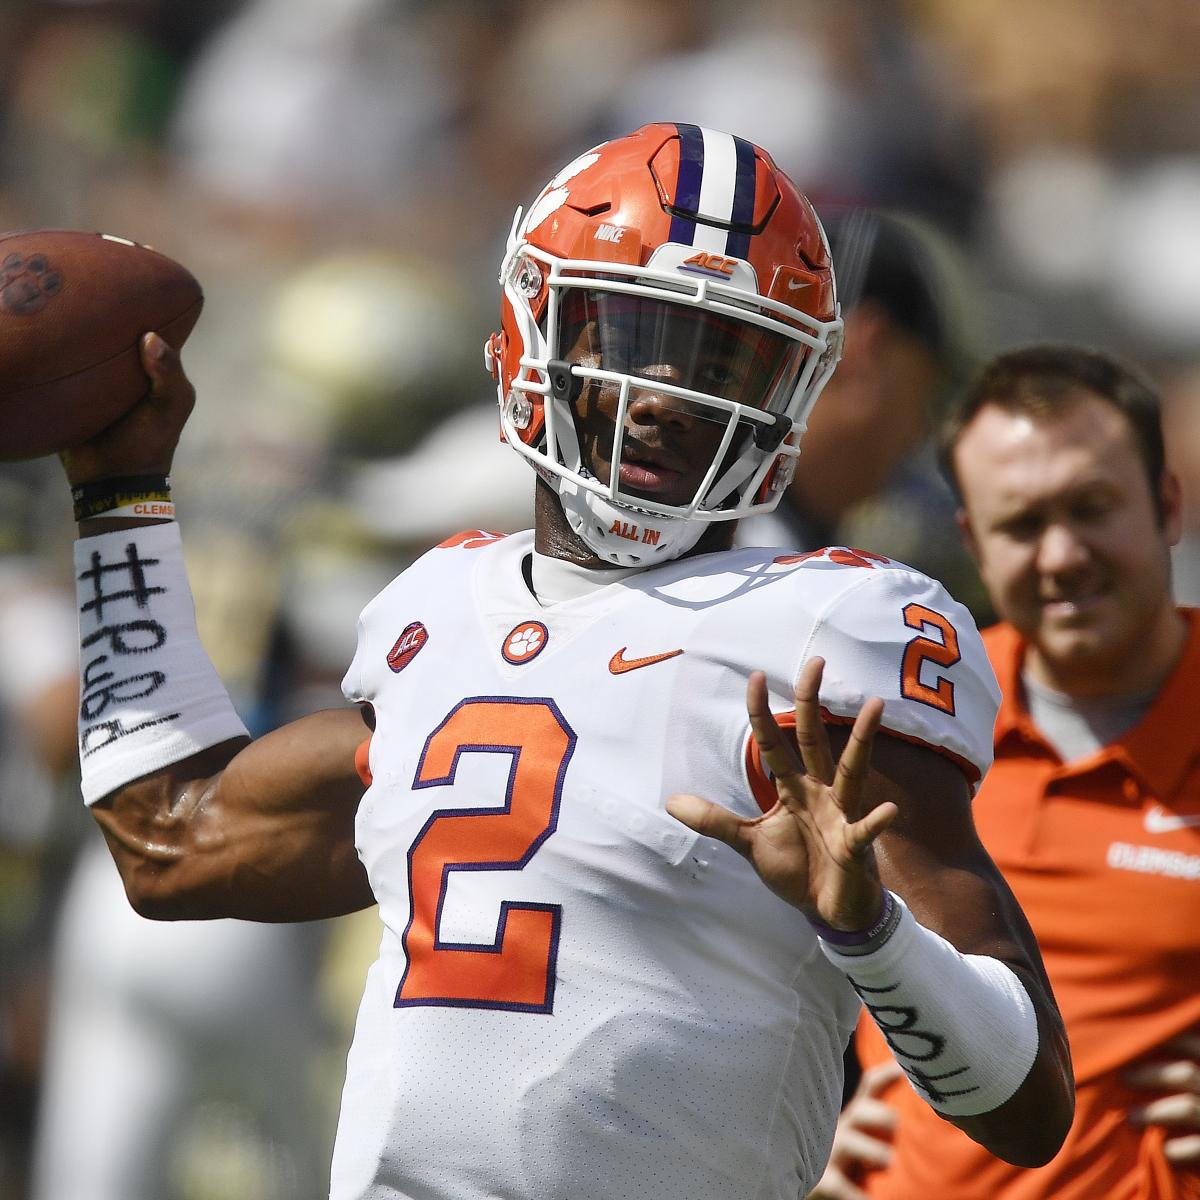 Kelly Bryant perplexed by Clemson national championship ring outrage